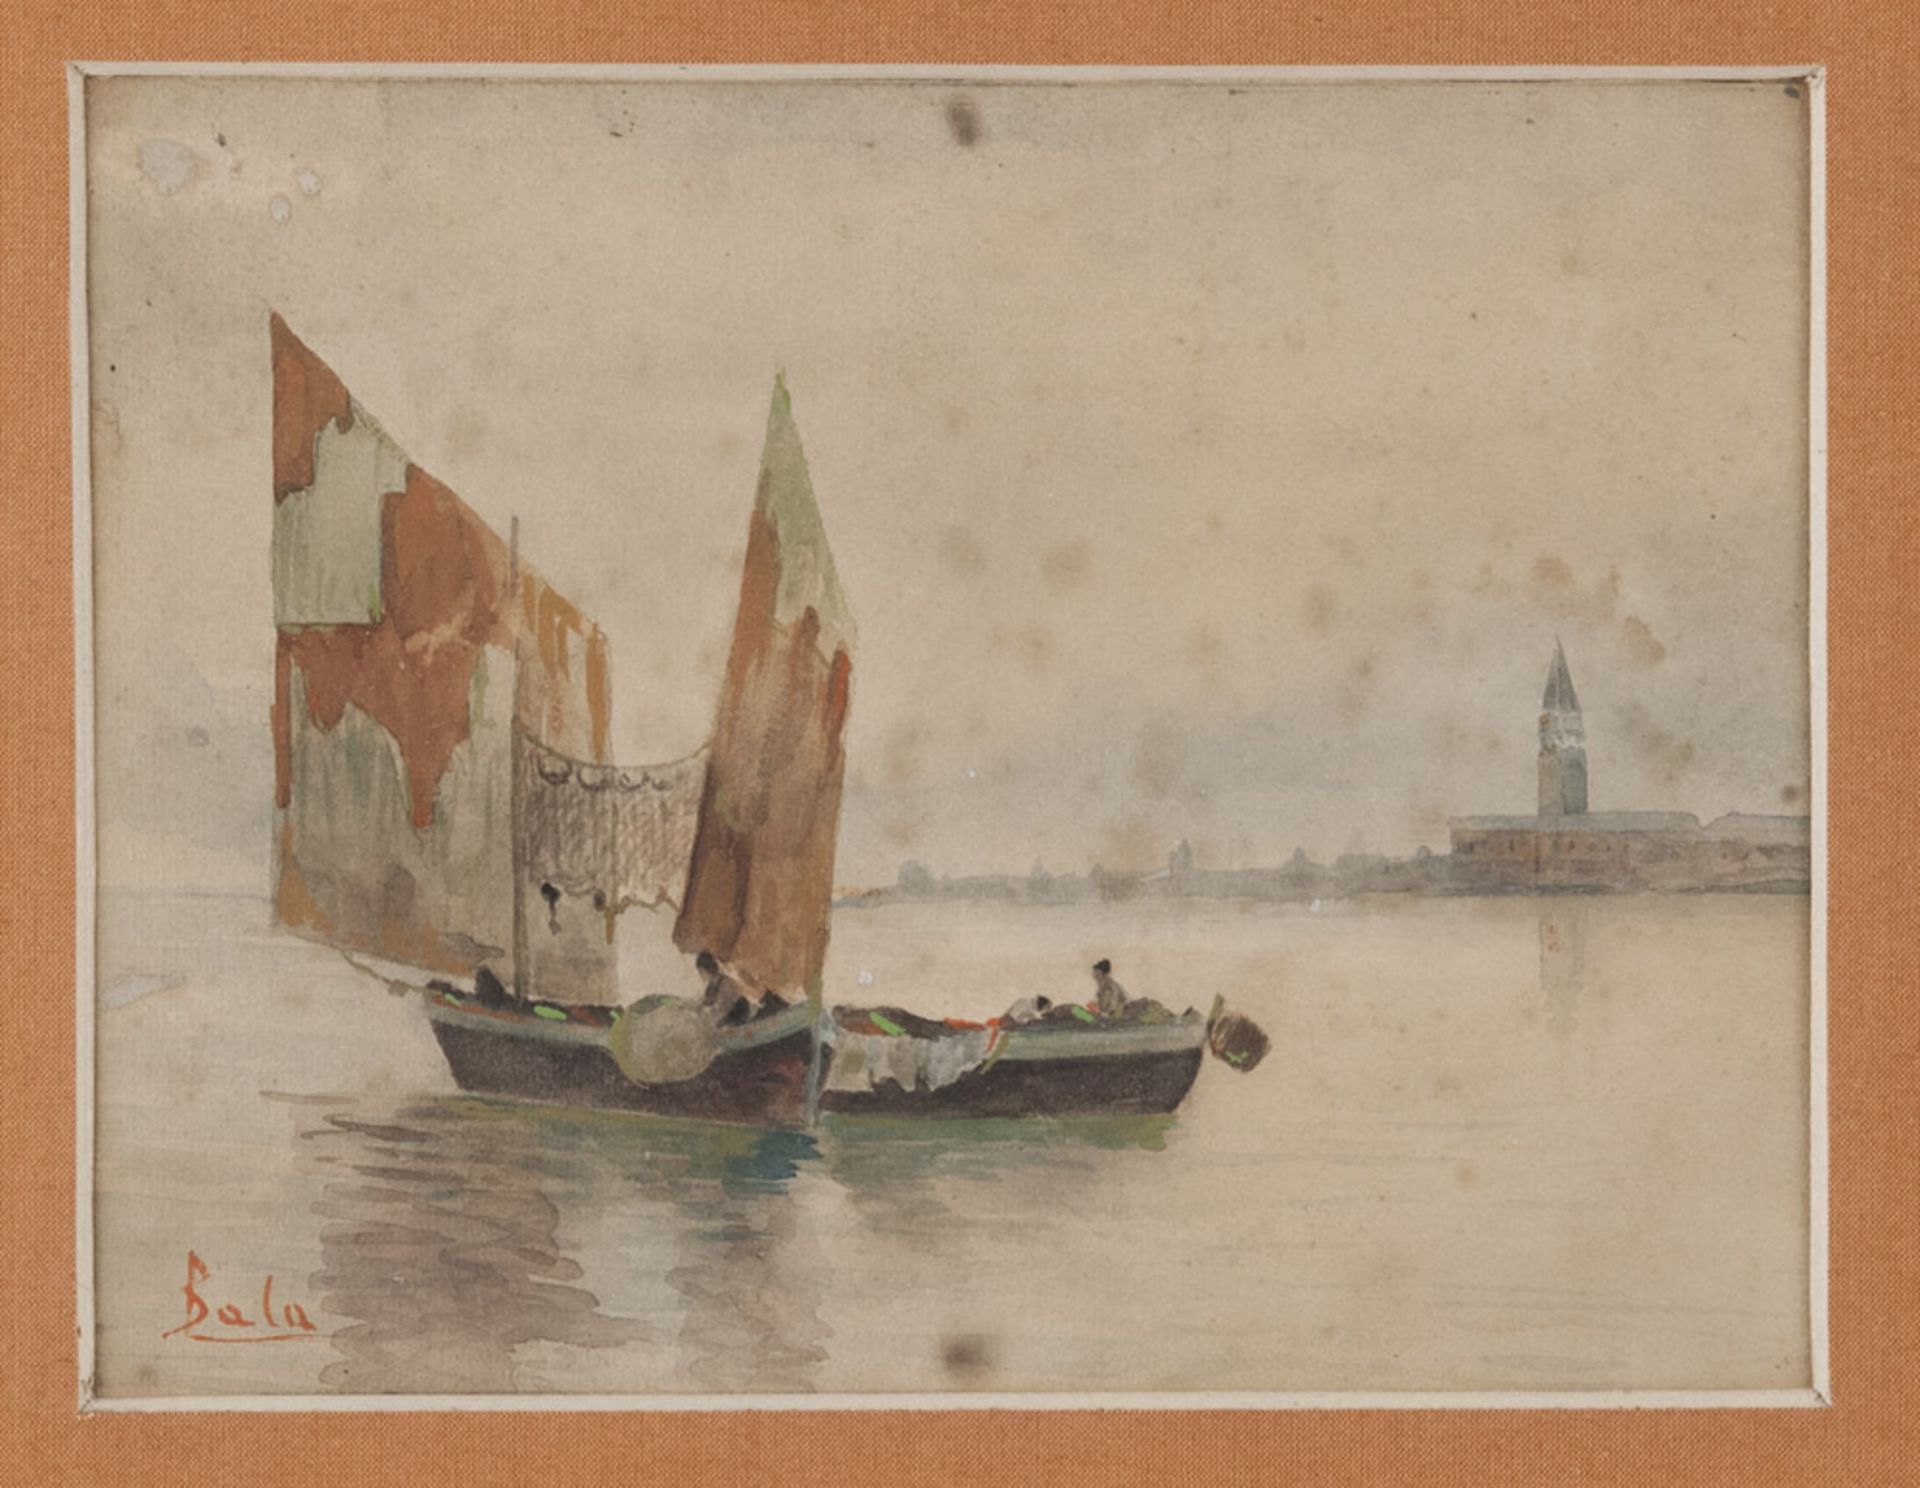 Paolo Sala (Milan 1859 - 1924). Fishermen in the lagoon in Venice. Water-color on paper, cm. 18 x